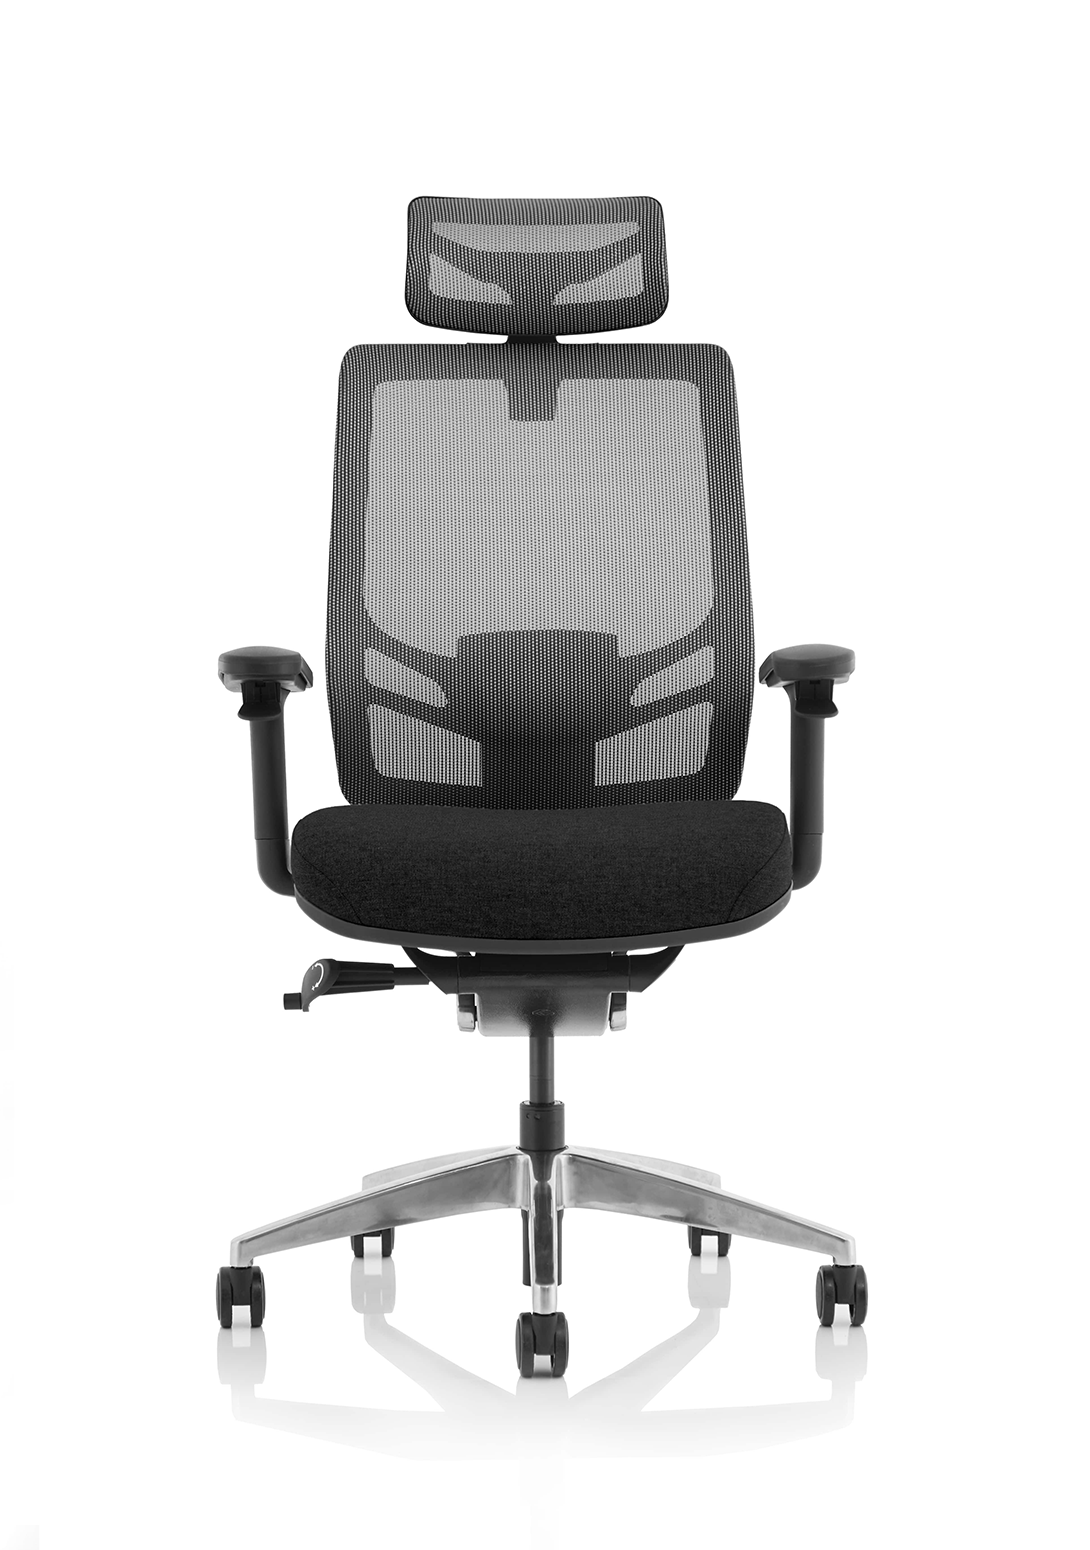 ErgoClick Home Office Chair | Posture Chair | Home Office Furniture | Combat poor posture | Chair that helps with posture | Ergonomic Office Furniture